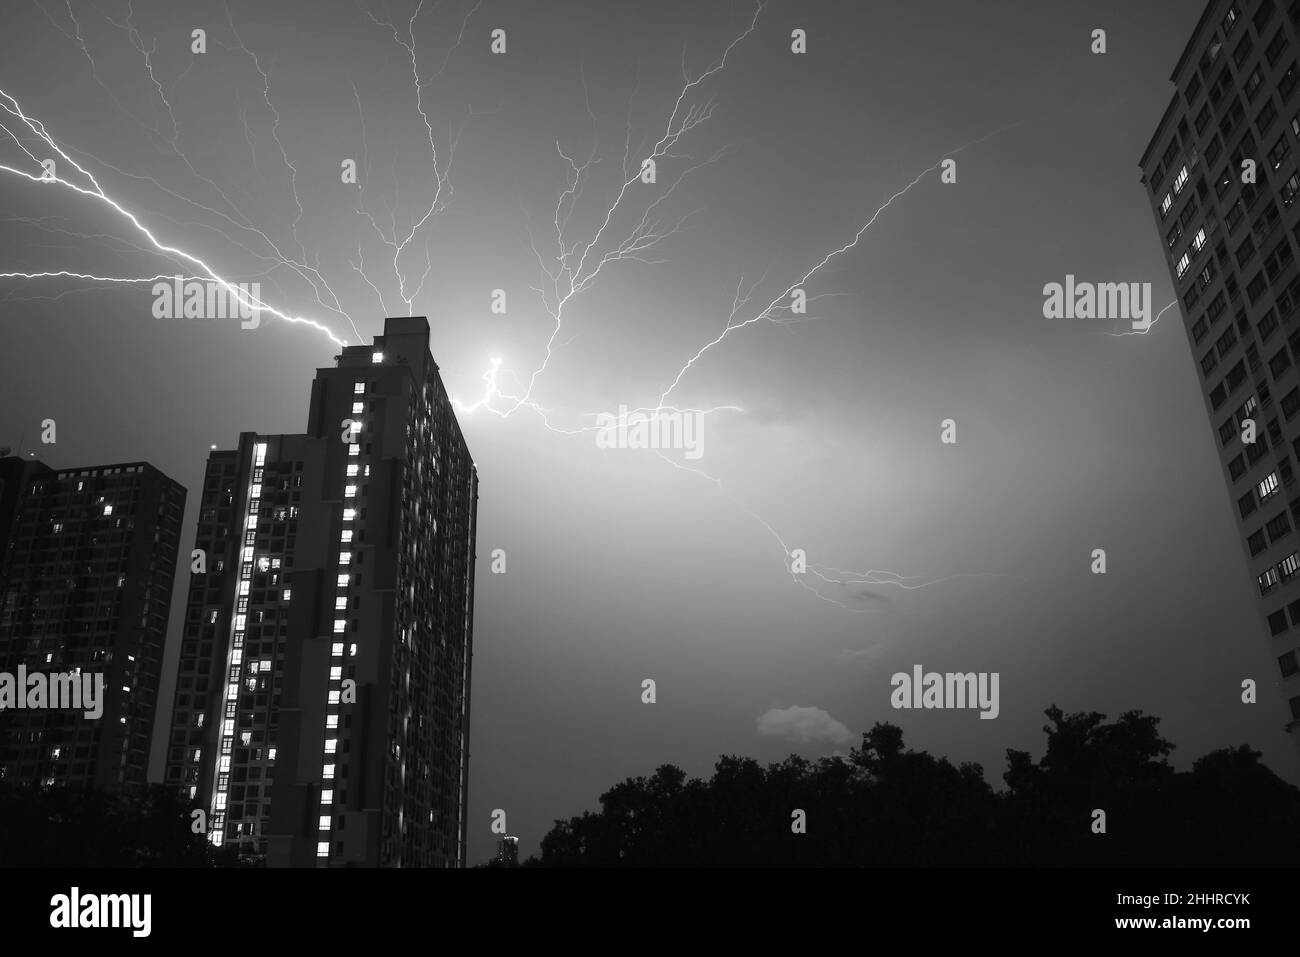 Monochrome Image of Incredible Real Lightning Strikes in the Urban Night Sky Stock Photo